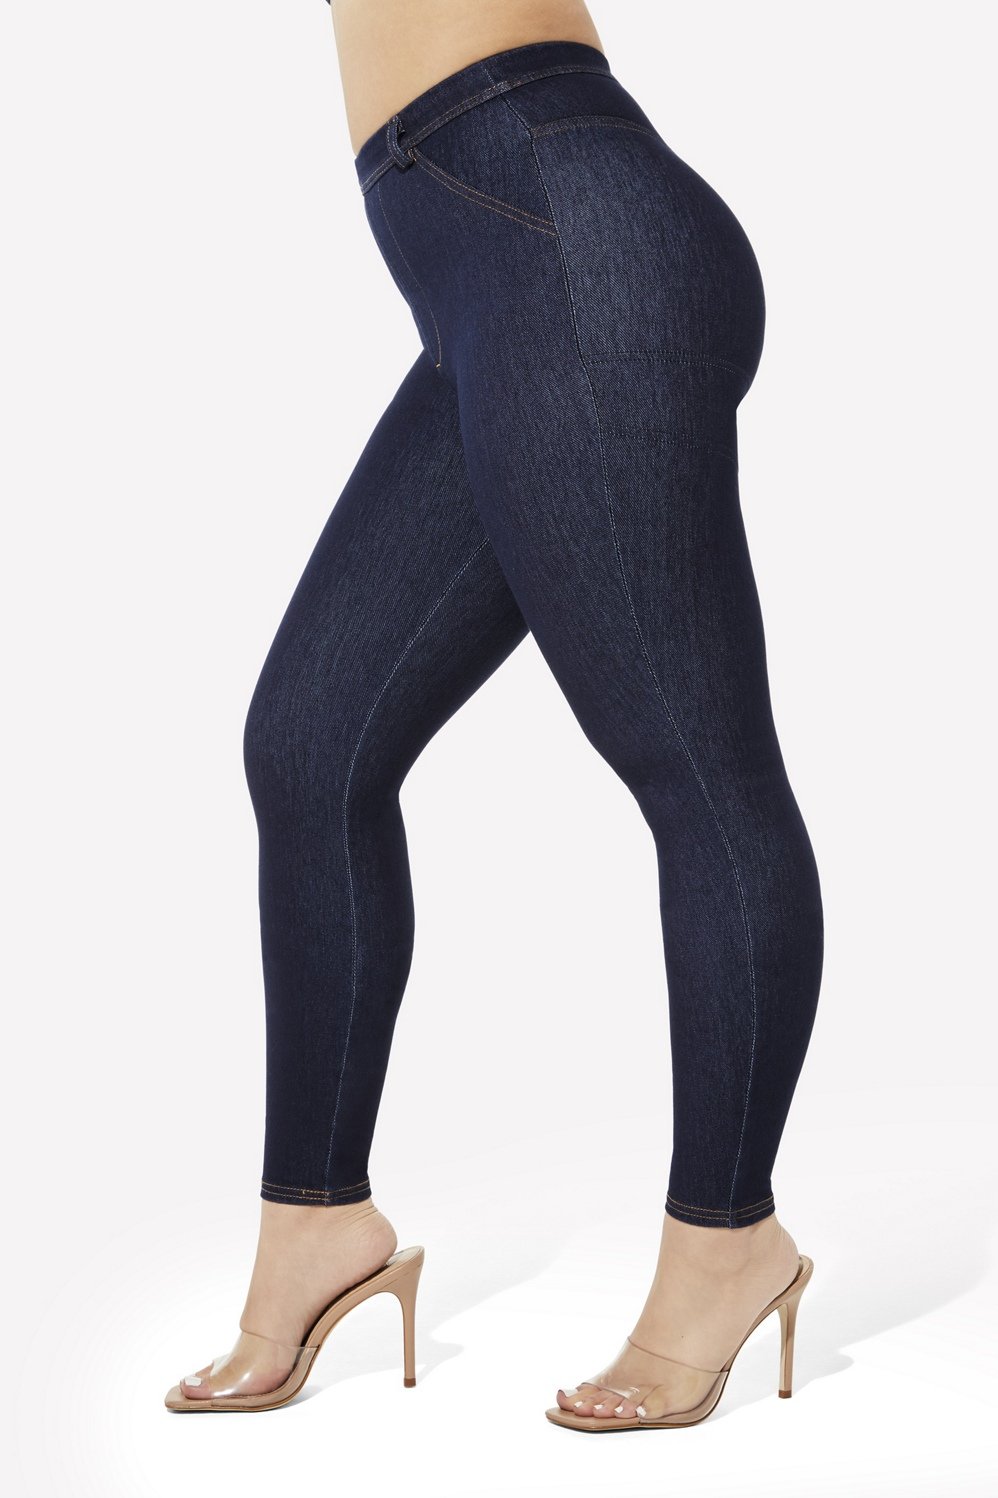 Denim Is Served Smoothing Stretch Jean - Yitty